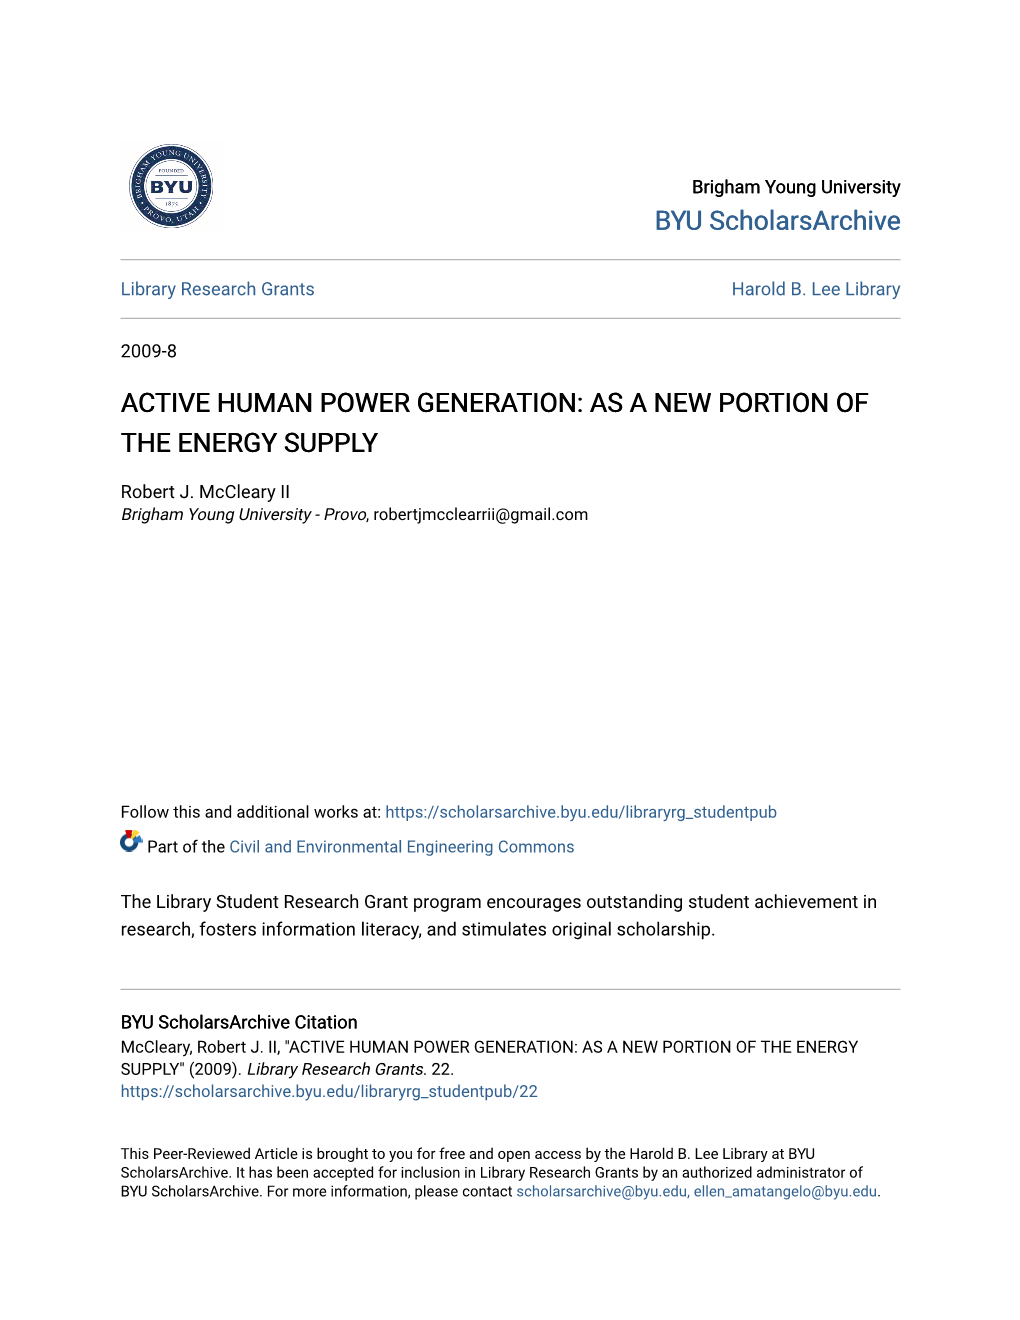 Active Human Power Generation: As a New Portion of the Energy Supply